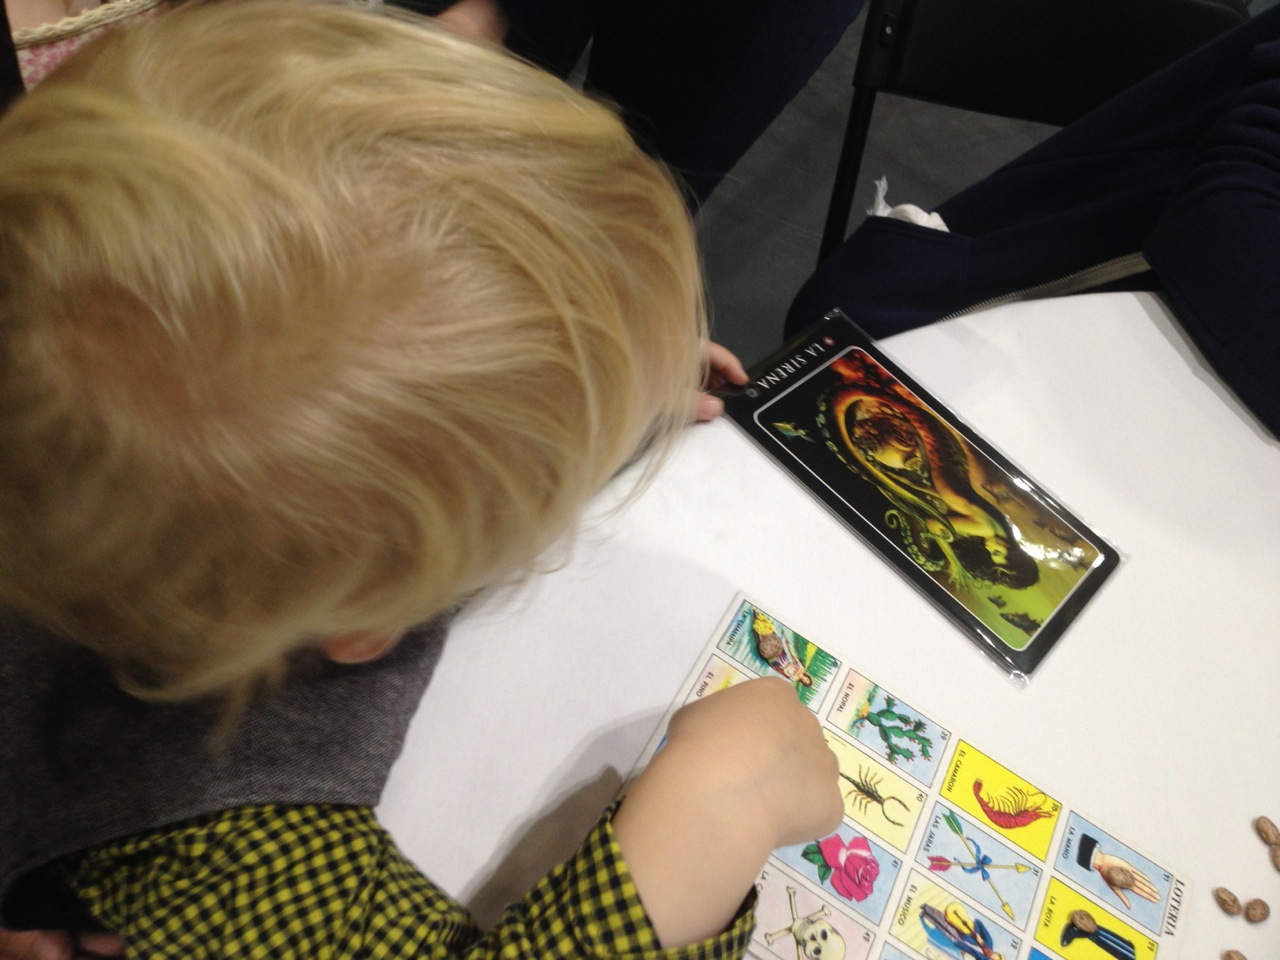 At the Loteria demo on Sunday morning: this kid won one of the awesome prizes—a pack of six "grande" Loteria cards!